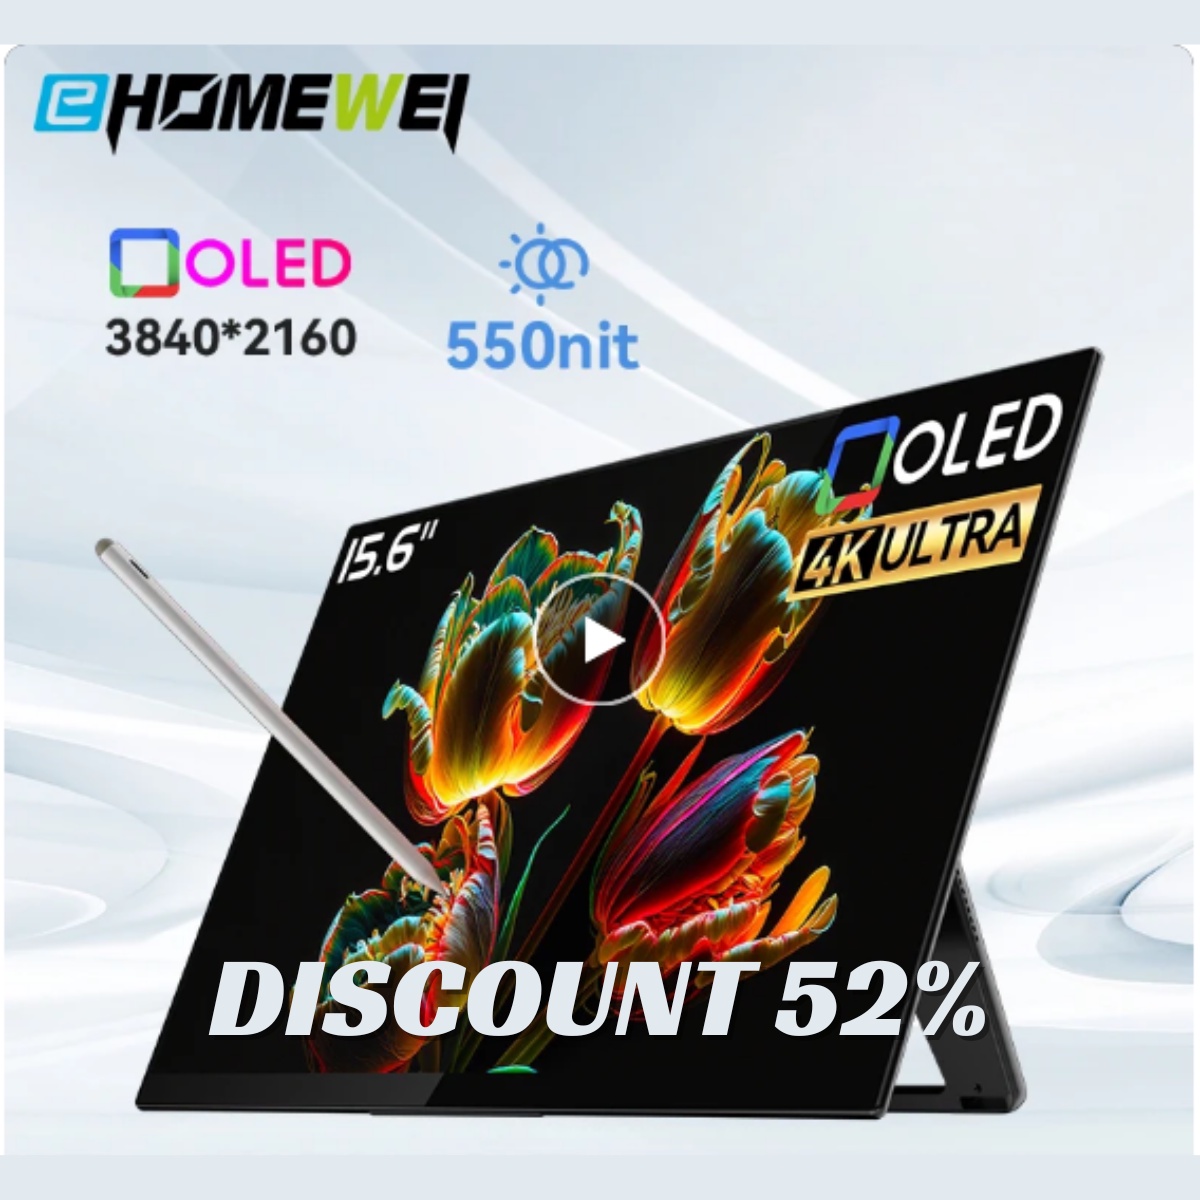 EHOMEWEI Portable Monitor RO5 OLED 15.6" 4K 60HZ 100%DCI-P3 Stylus Touch Monitors For Laptop PC PS5 XBOX